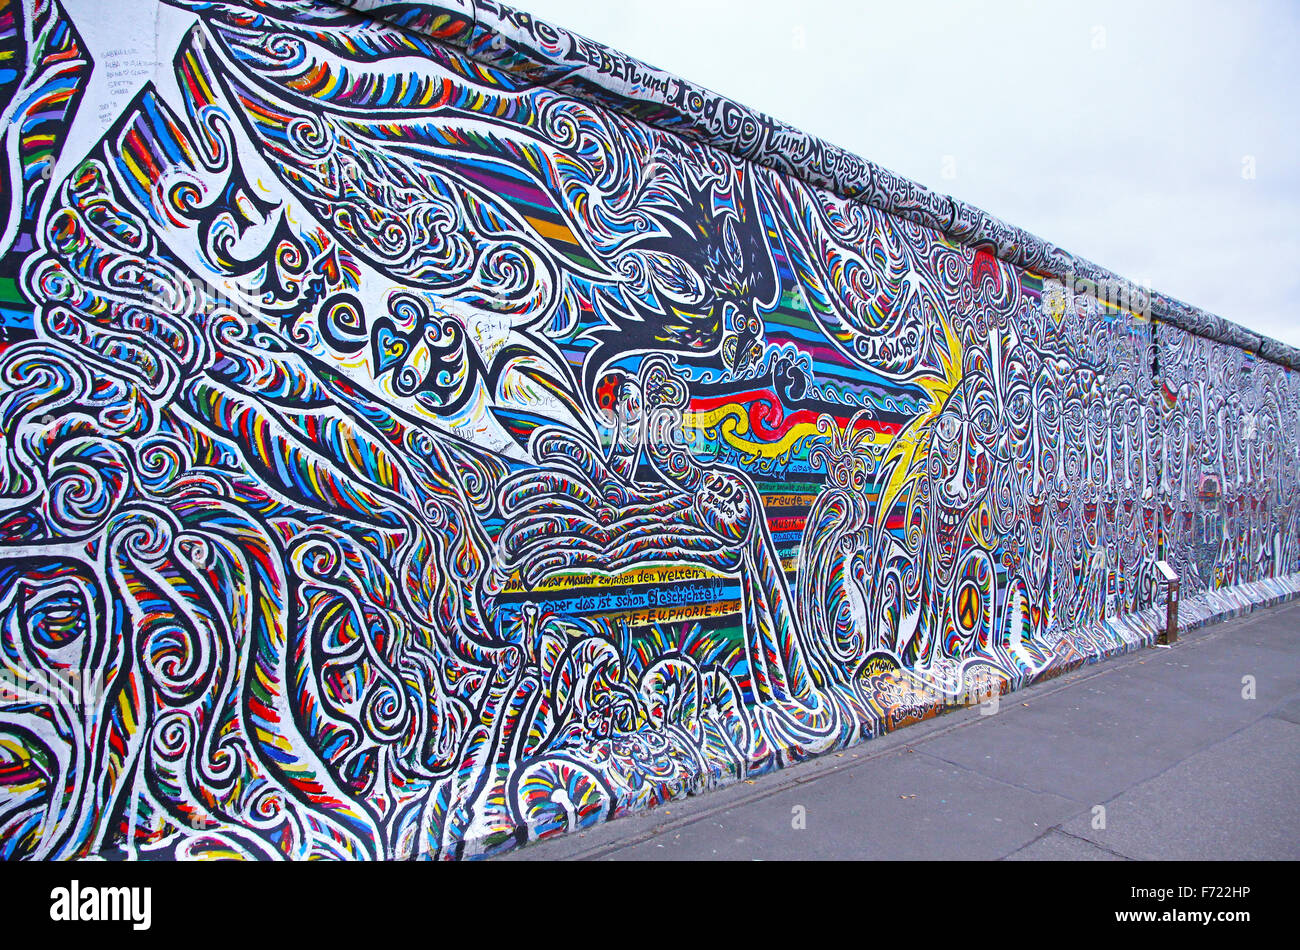 BERLIN - NOVEMBER 10, 2013: Fragment of East Side Gallery on November 10, 2013 in Berlin, Germany. It's a 1.3 km long part of original Berlin Wall which collapsed in 1989, and now is the largest world amateur art gallery of graffiti Stock Photo